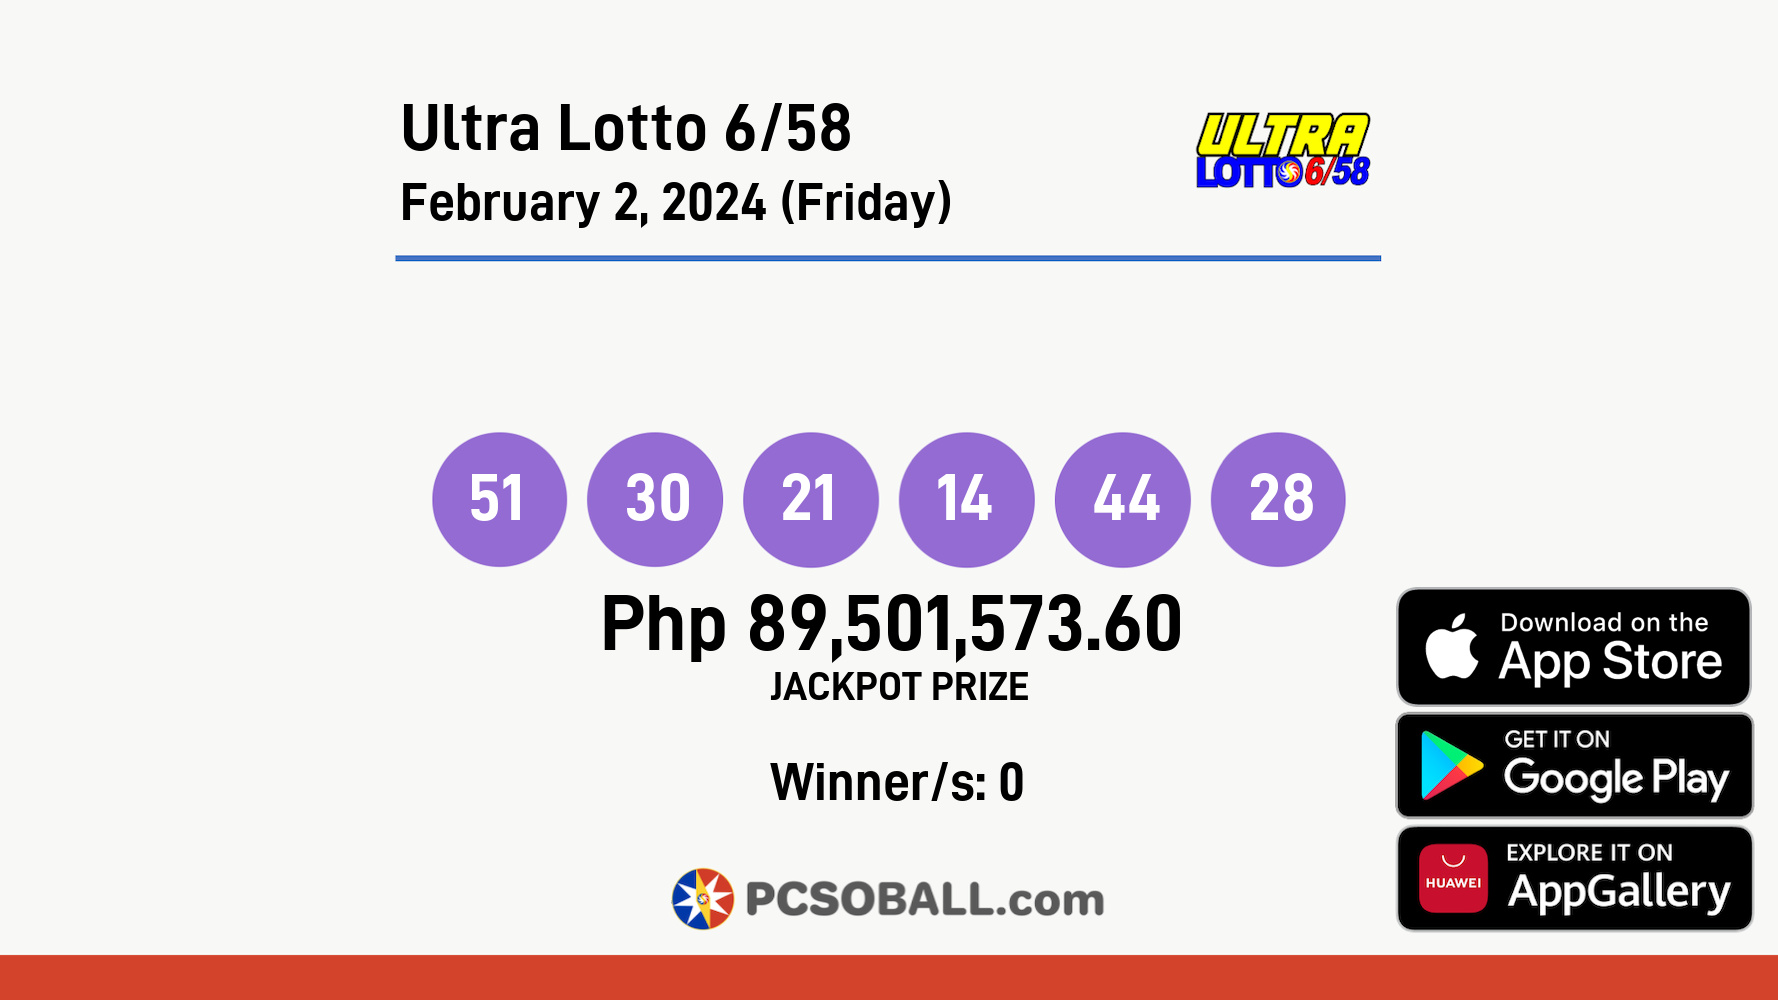 Ultra Lotto 6/58 February 2, 2024 (Friday) Result